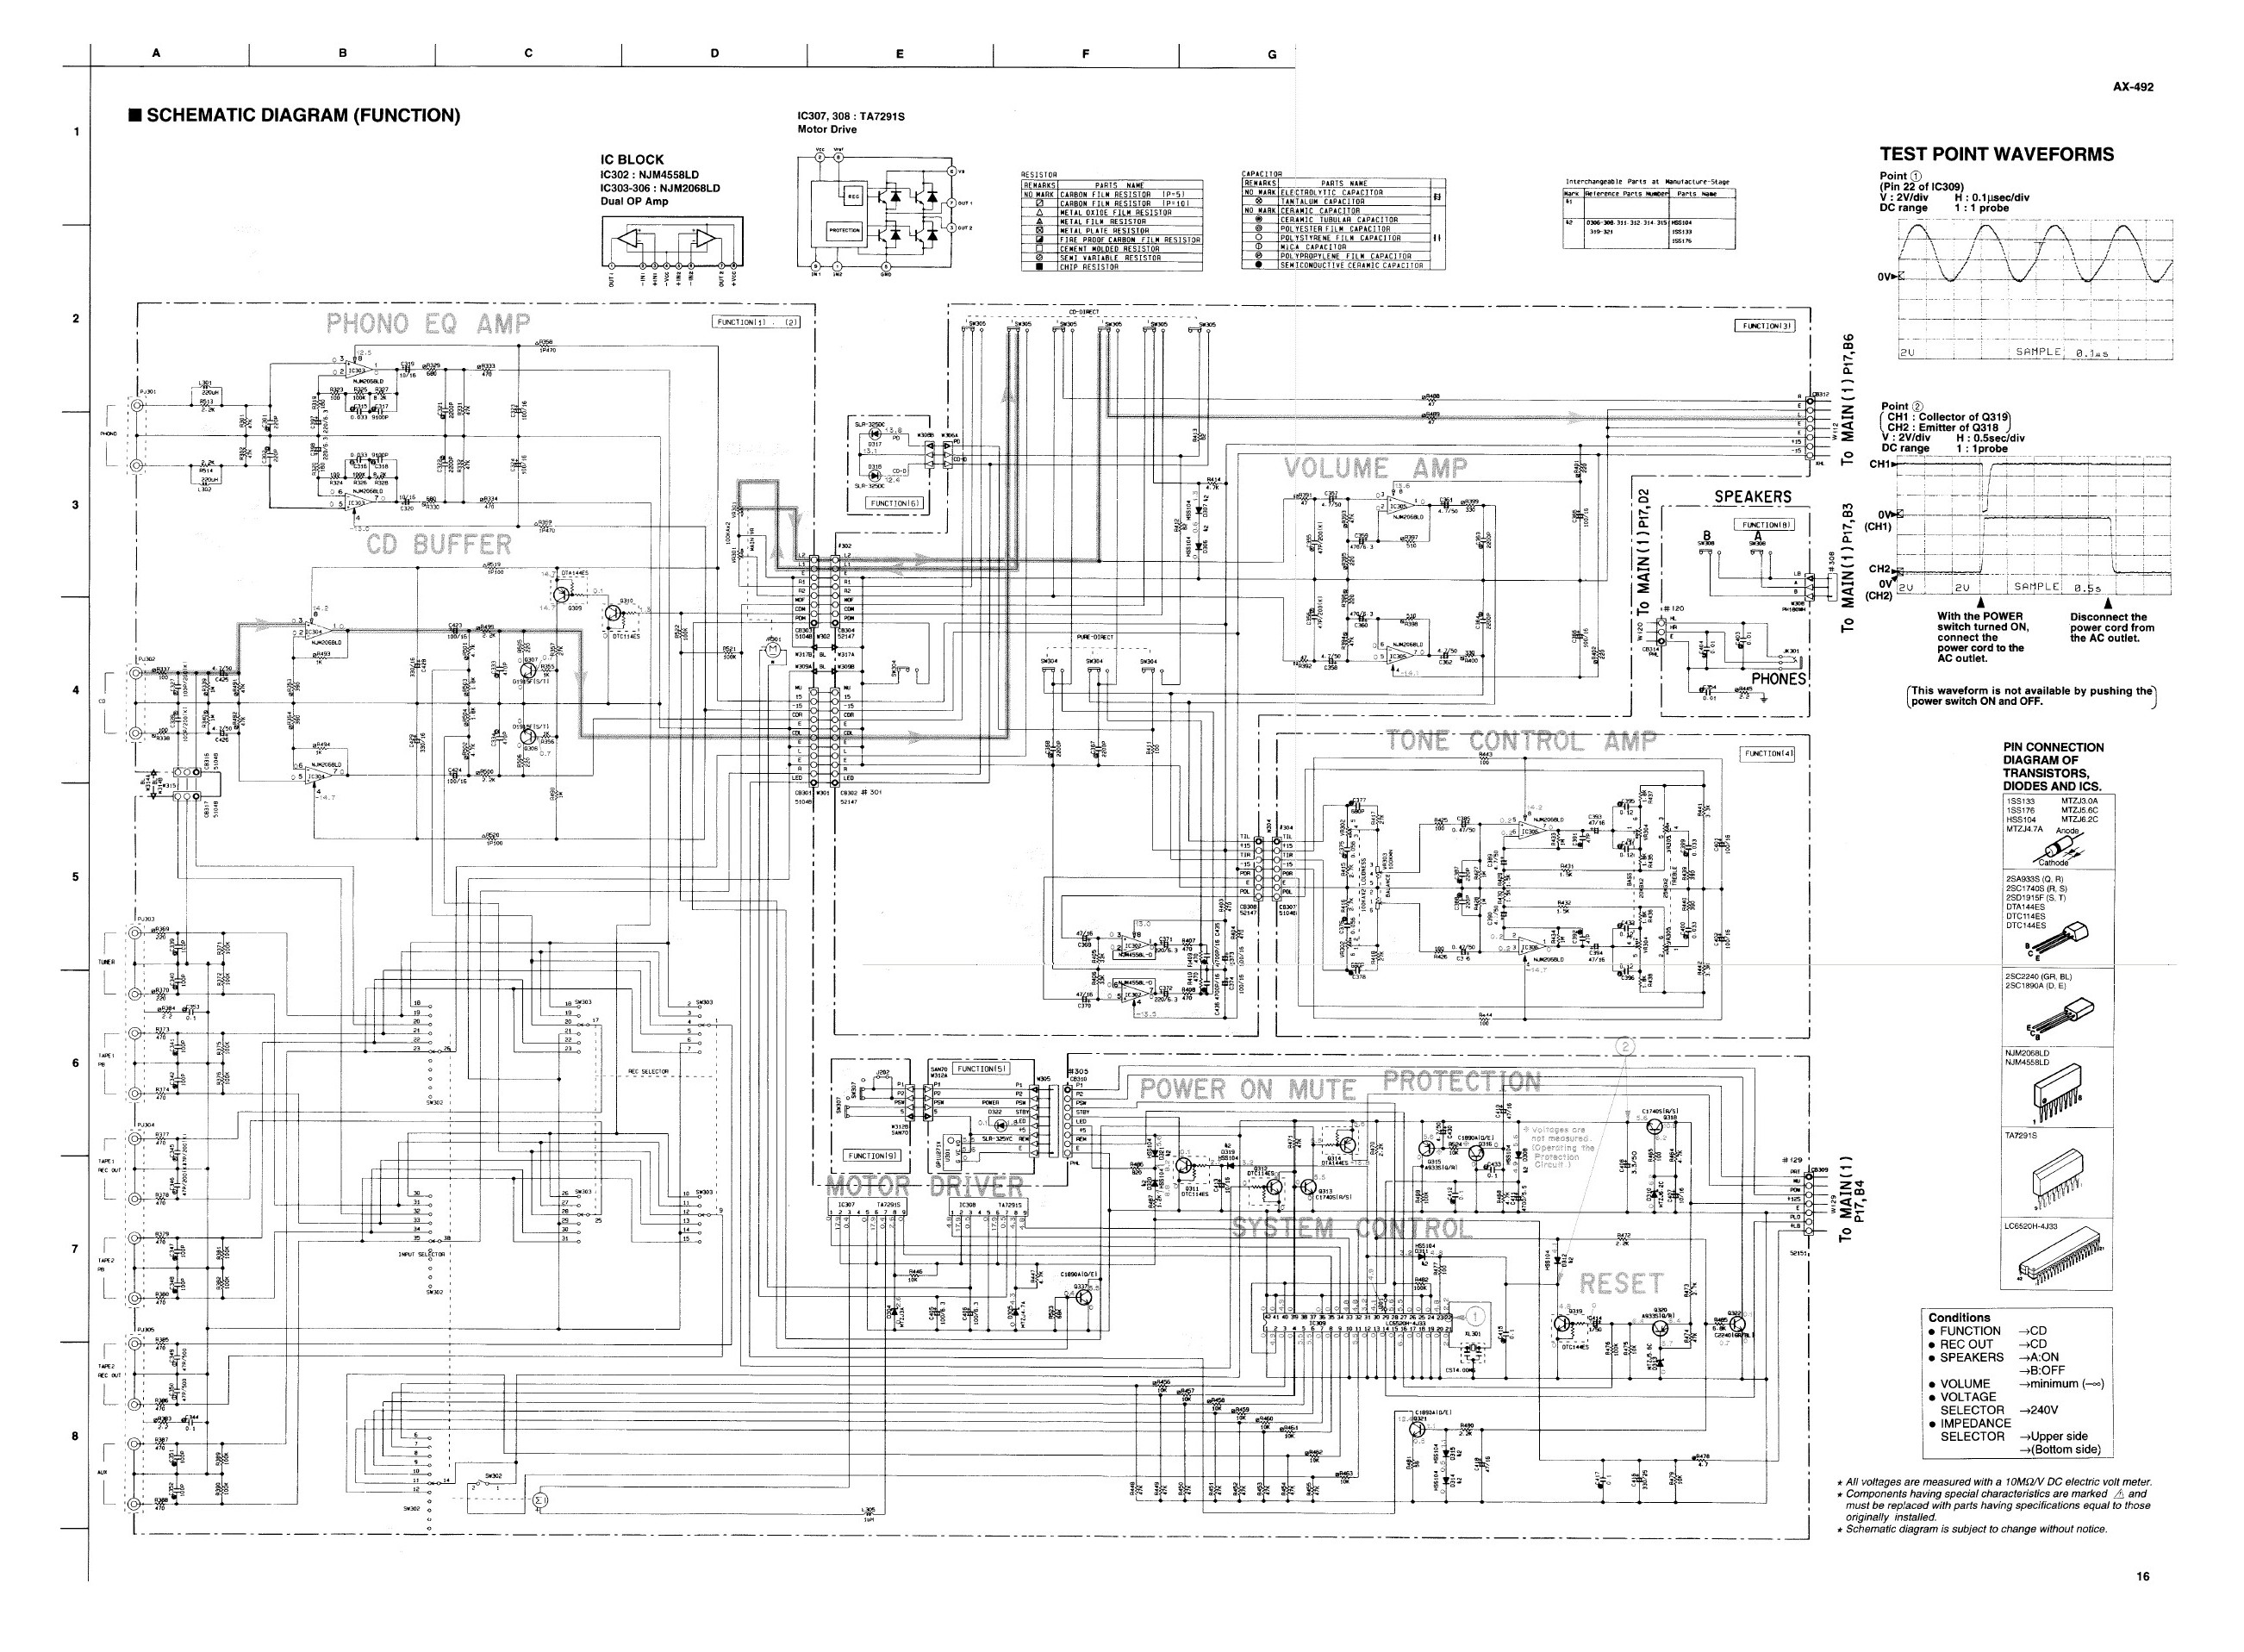 Yamaha AX-492 Schematic diagram of the section Function